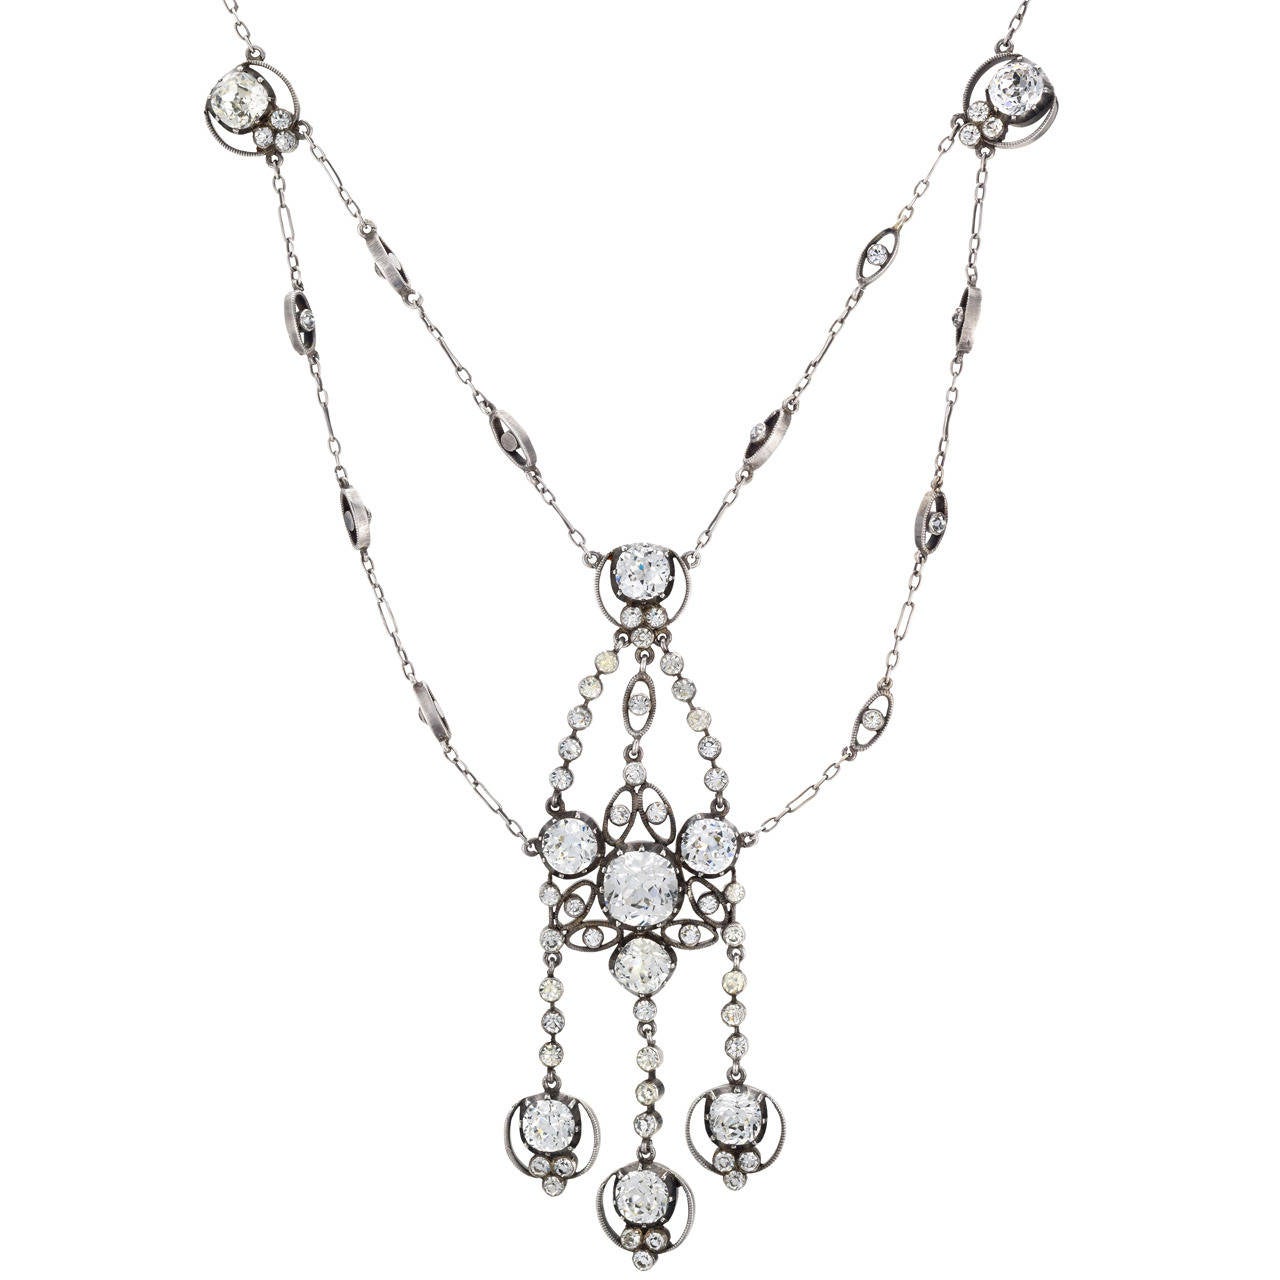 Late Victorian Sparkling Paste Sterling Silver Swag Necklace